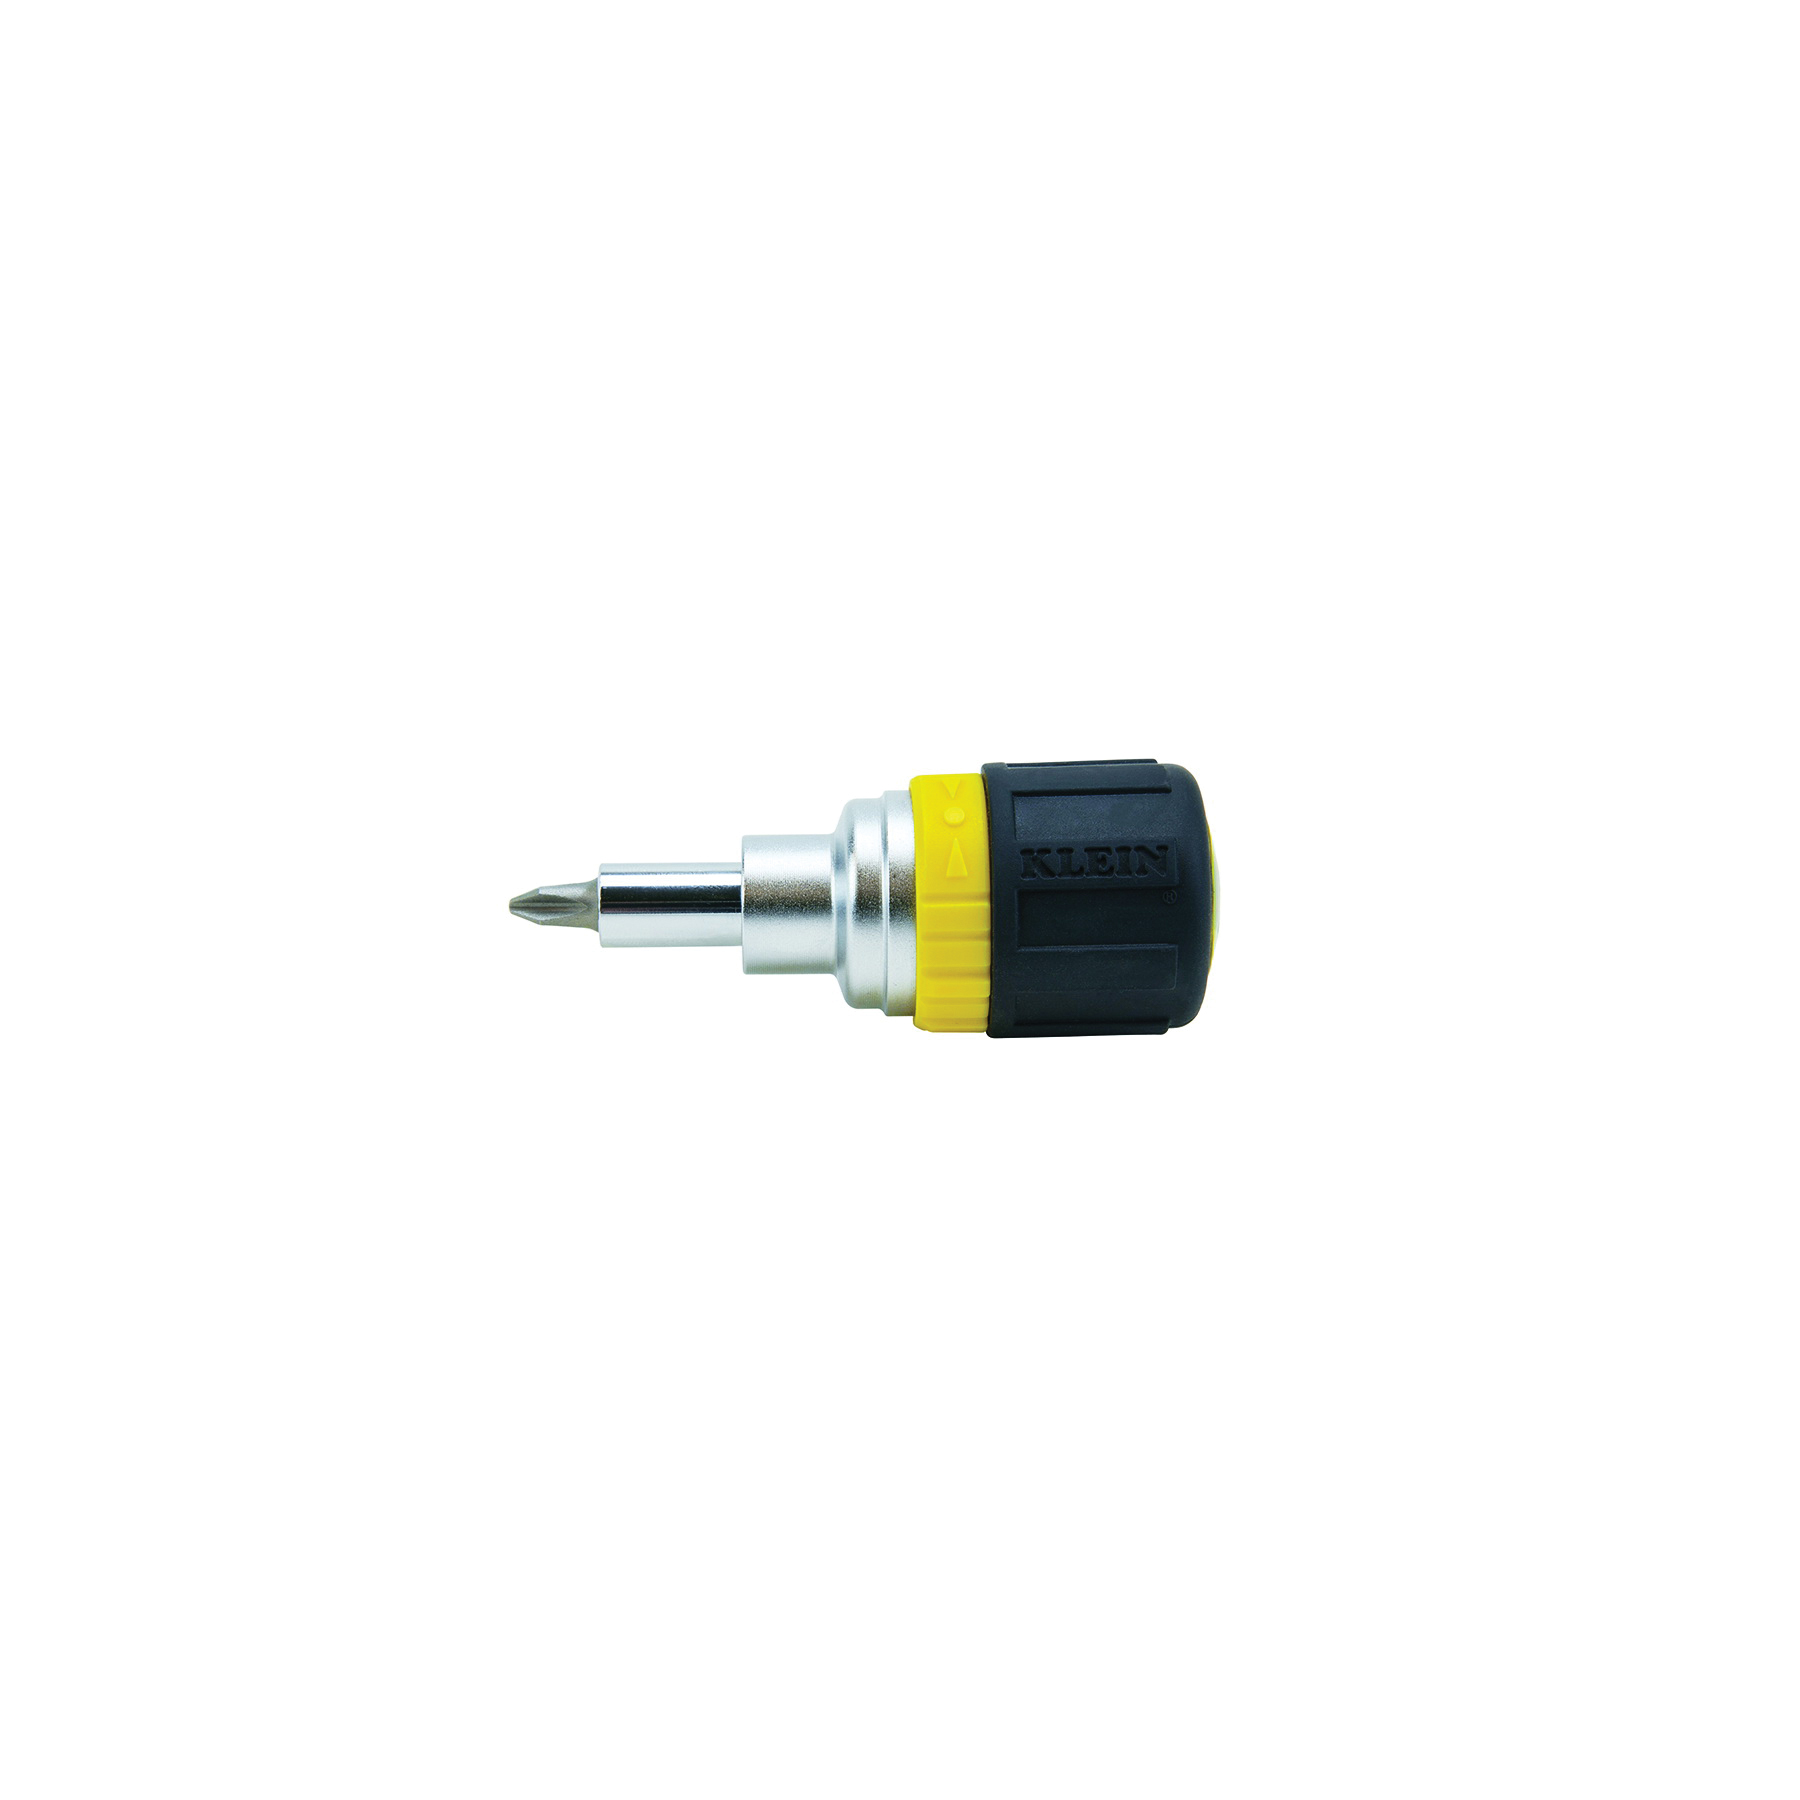 KLEIN TOOLS® 32593 Ratcheting Stubby Screwdriver, Phillips, Slotted Point, 3-1/2 in OAL, Cushion Grip Handle